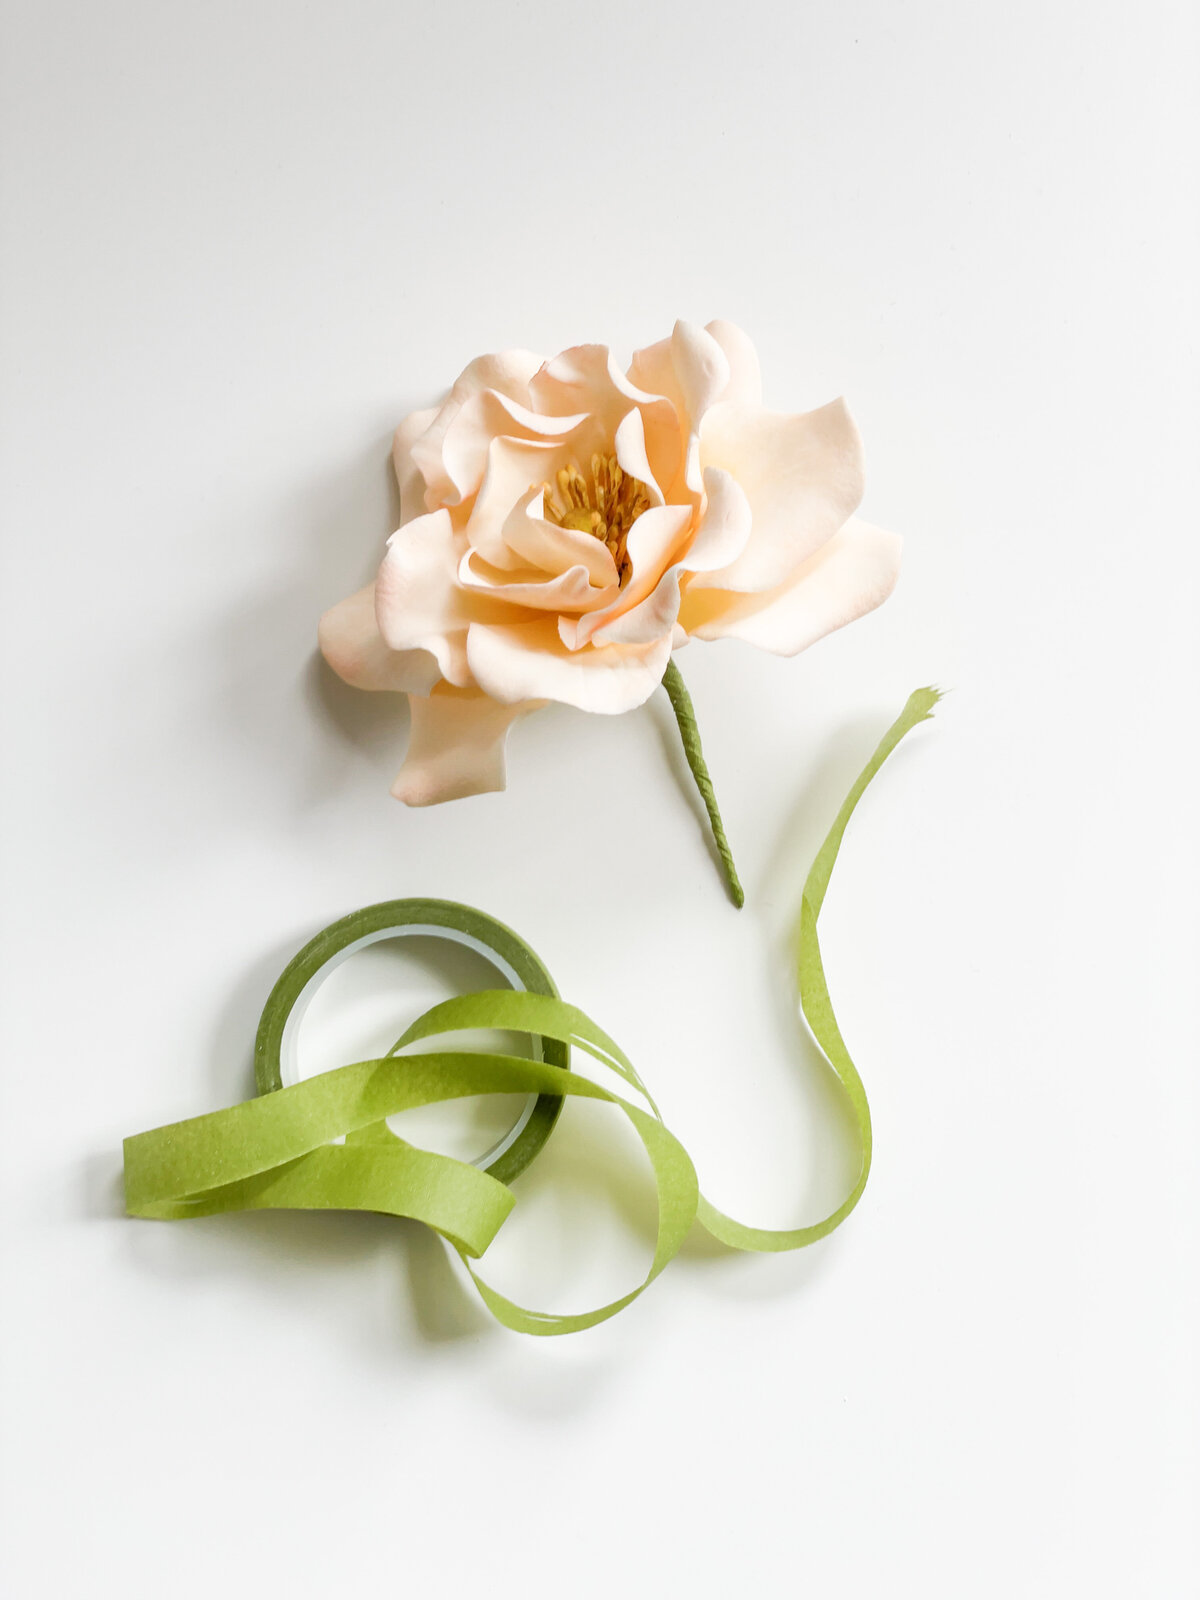 Sugar flower rose with light green floral tape